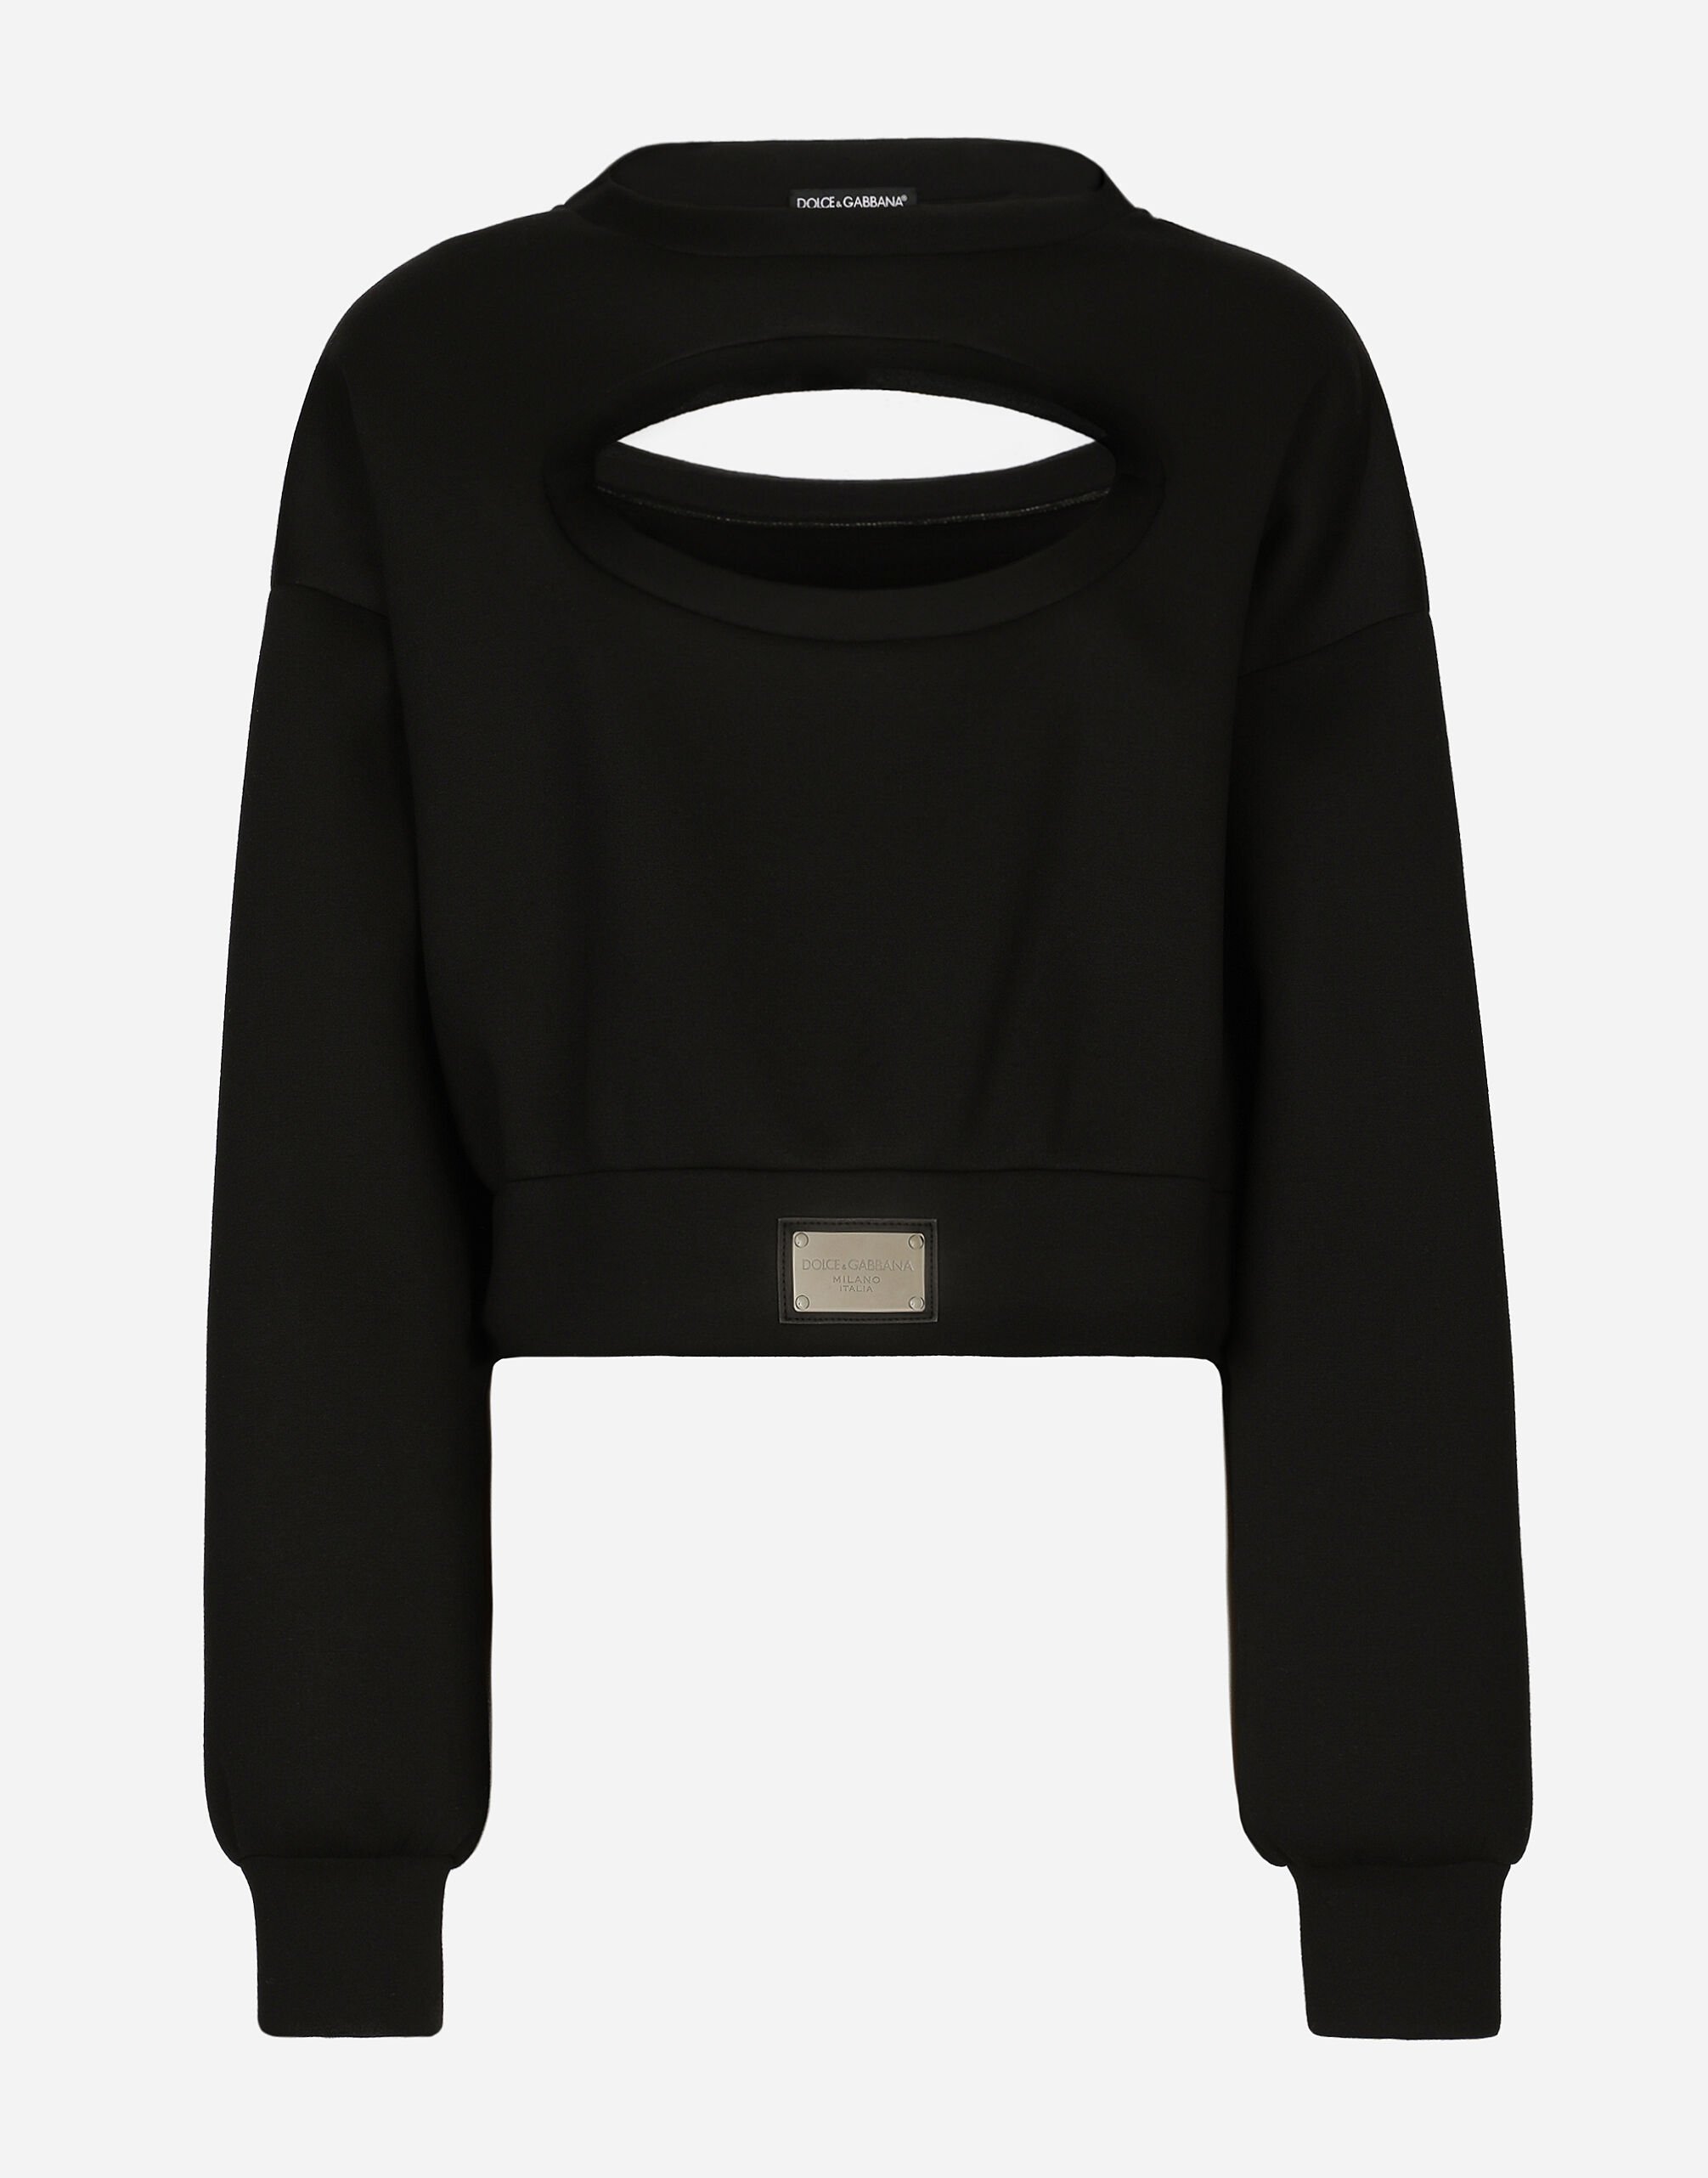 Dolce & Gabbana Technical jersey sweatshirt with cut-out and Dolce&Gabbana tag Print FXV08TJCVS2